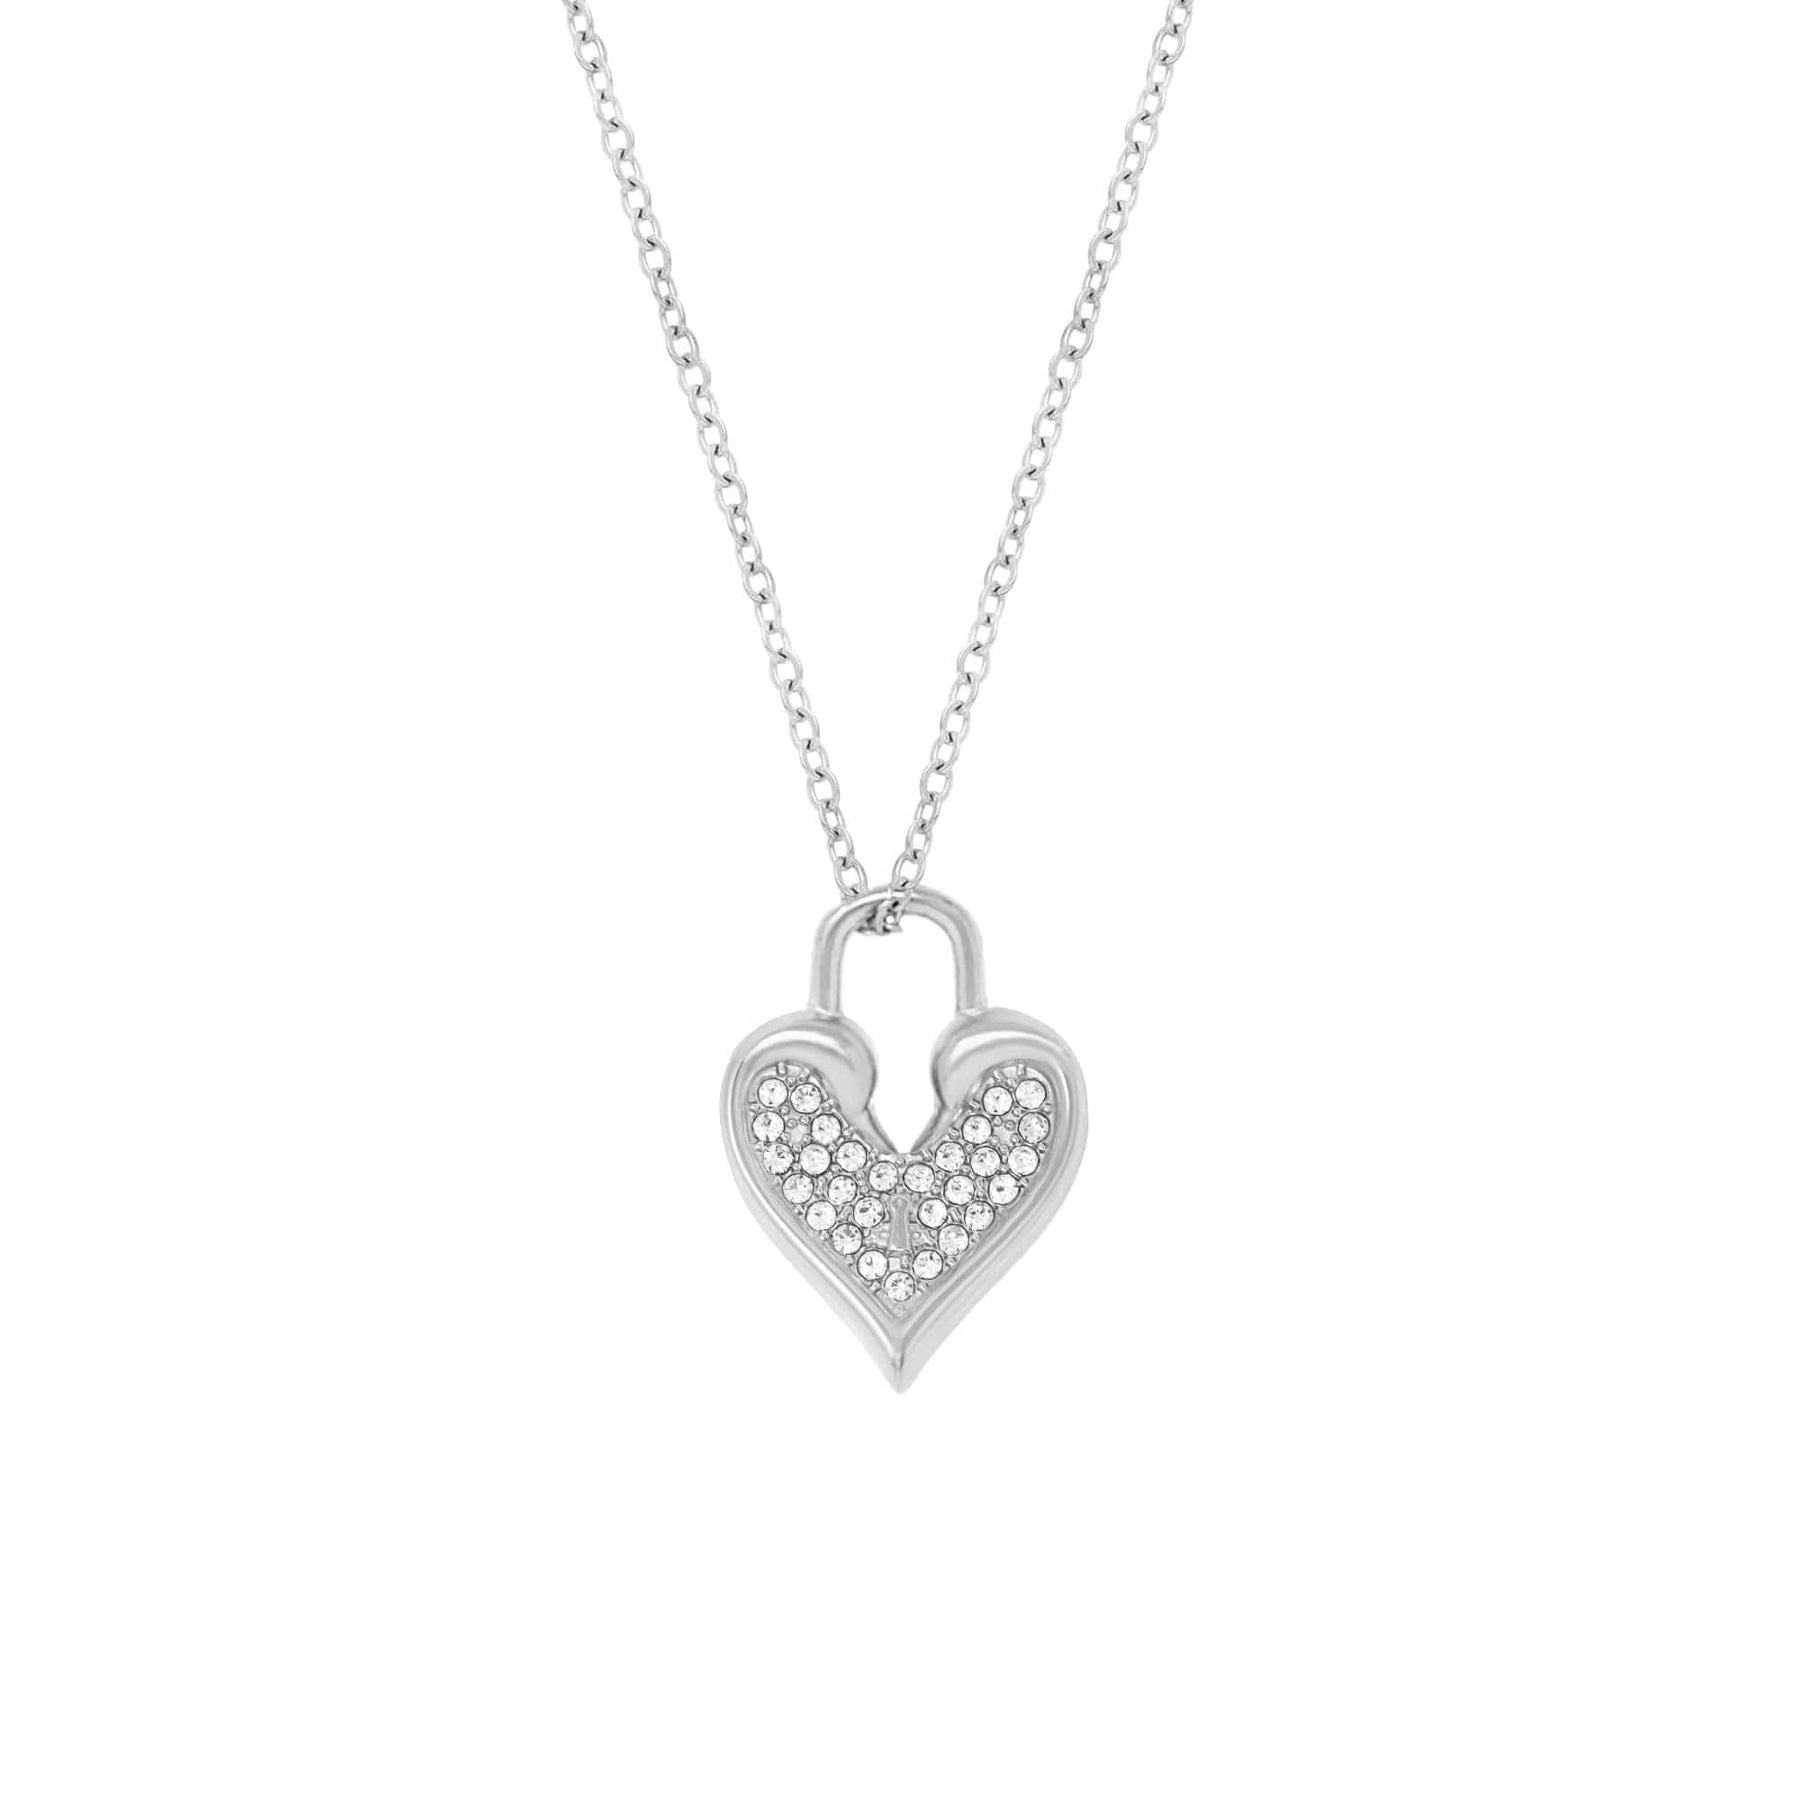 BohoMoon Stainless Steel Lovers Necklace Silver